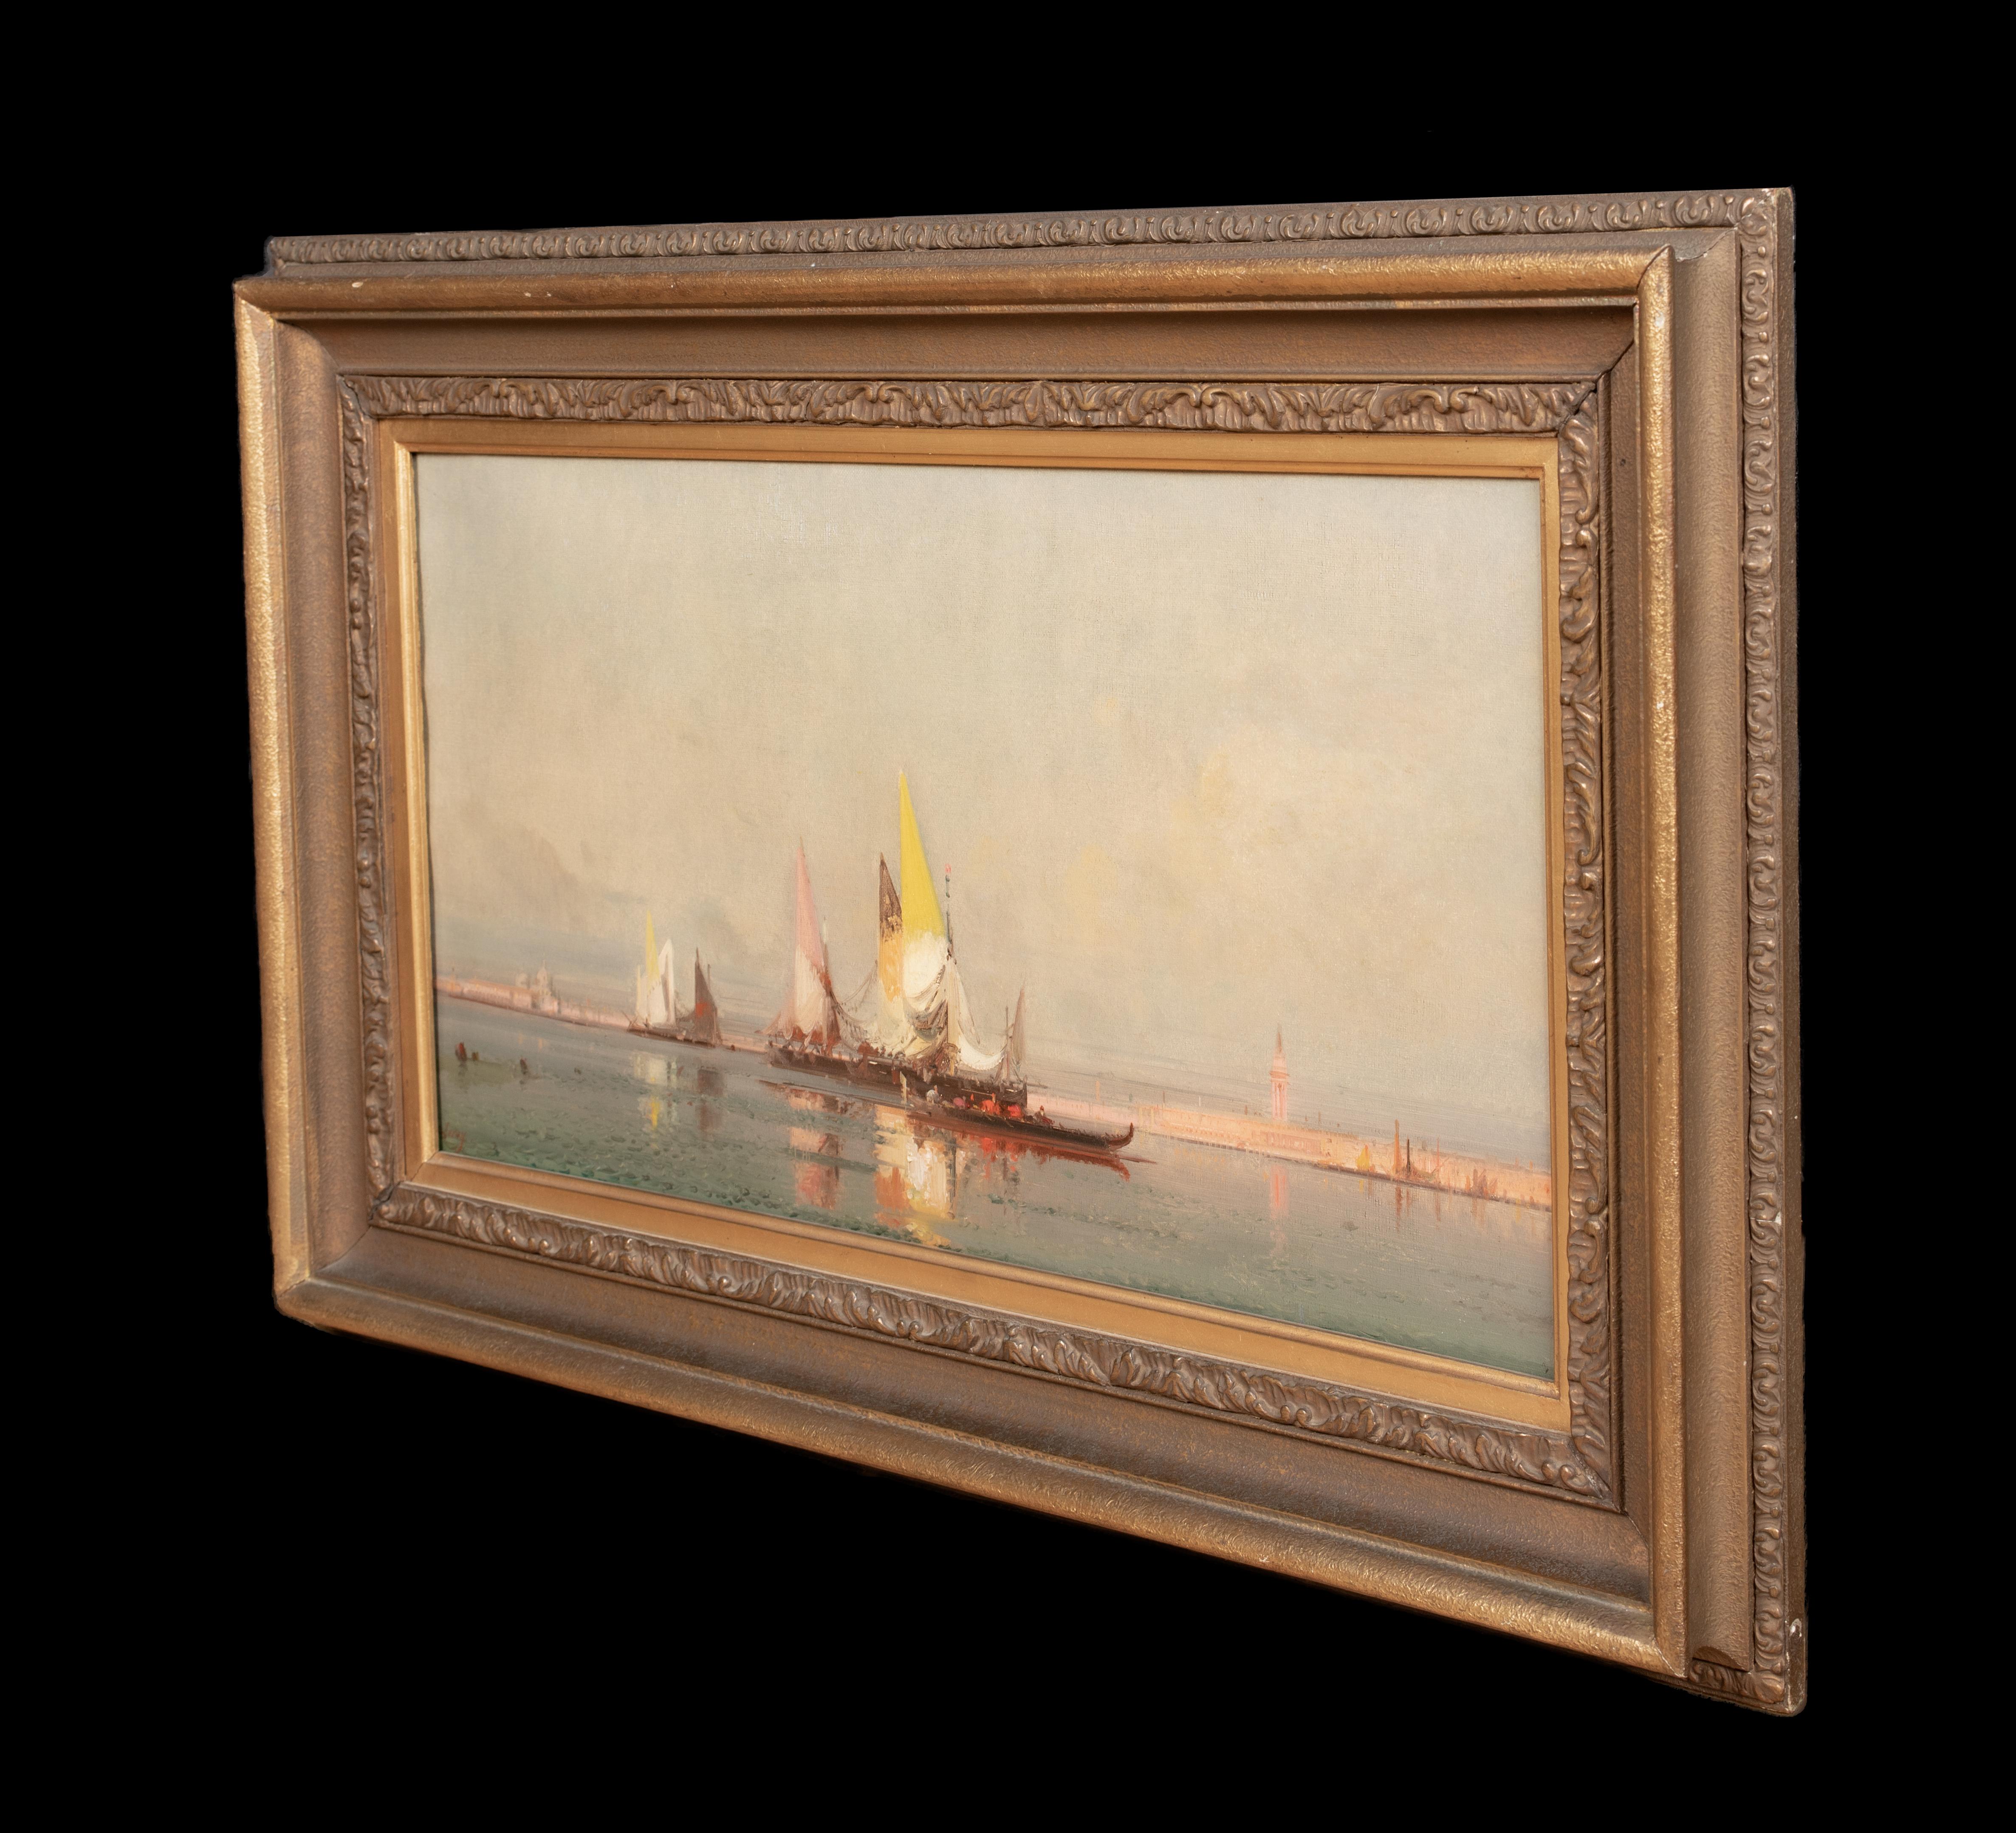 Ships Sailing In A Venice Lagon At Sunset 19th Century Etienne Leroy (1828-1876) For Sale 6